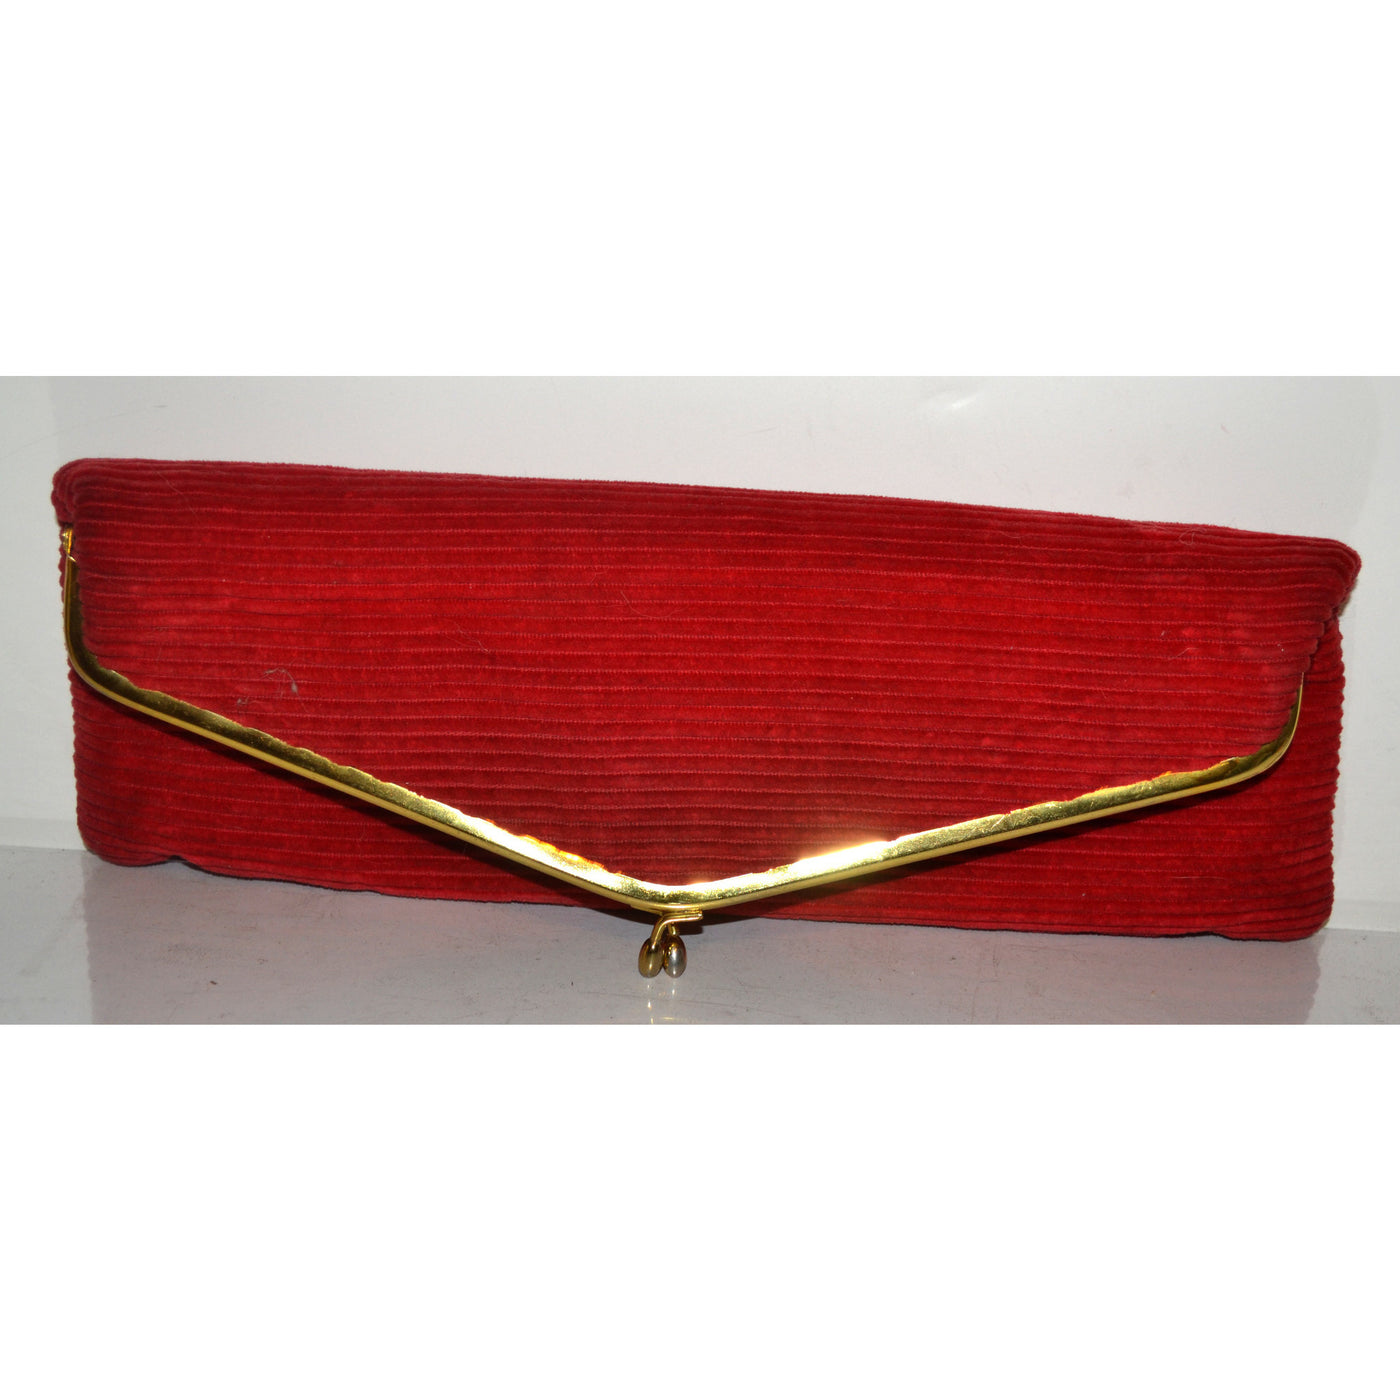 Vintage Red Fold Over Corduroy Clutch Purse